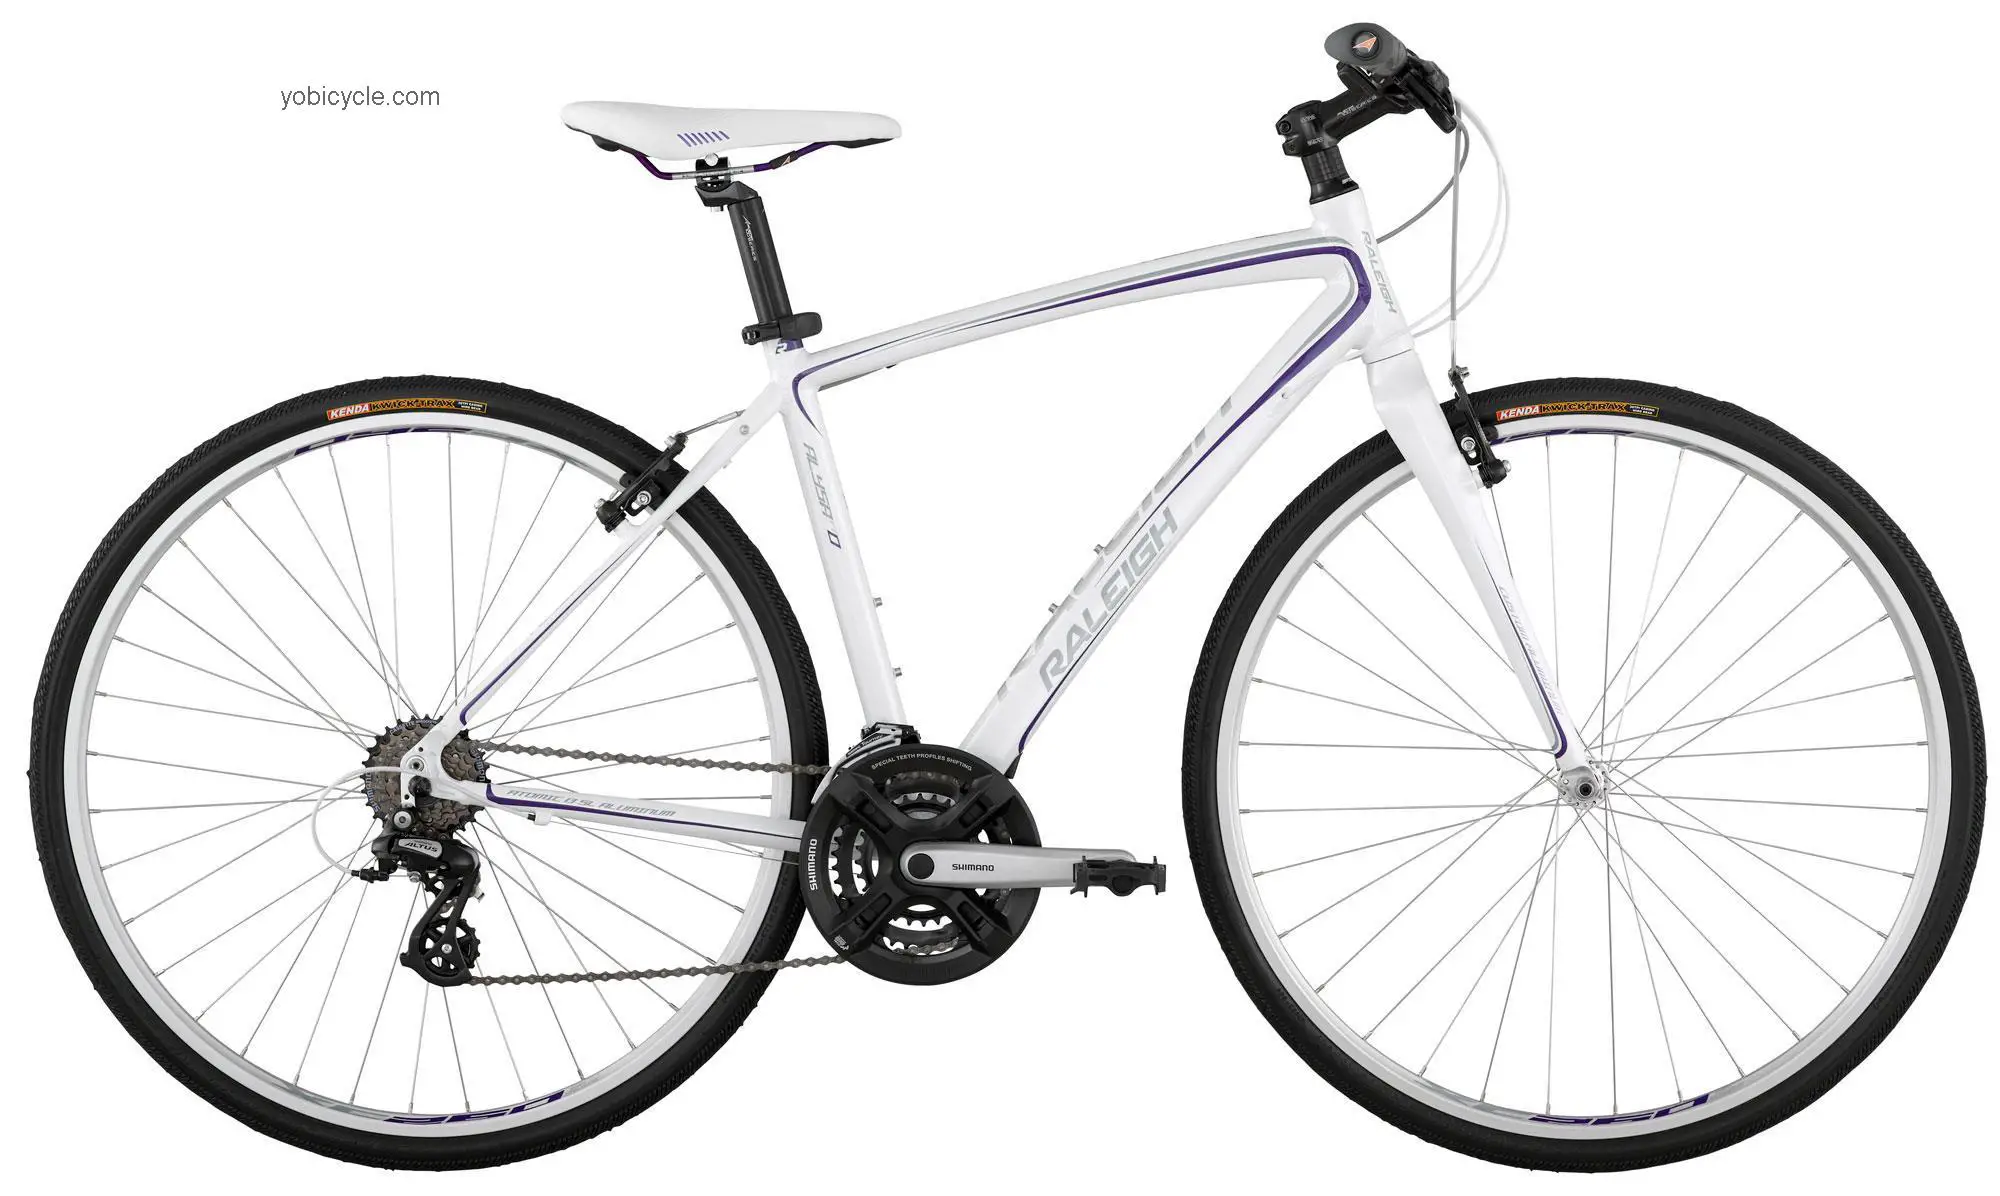 Raleigh Alysa FT0 2012 comparison online with competitors